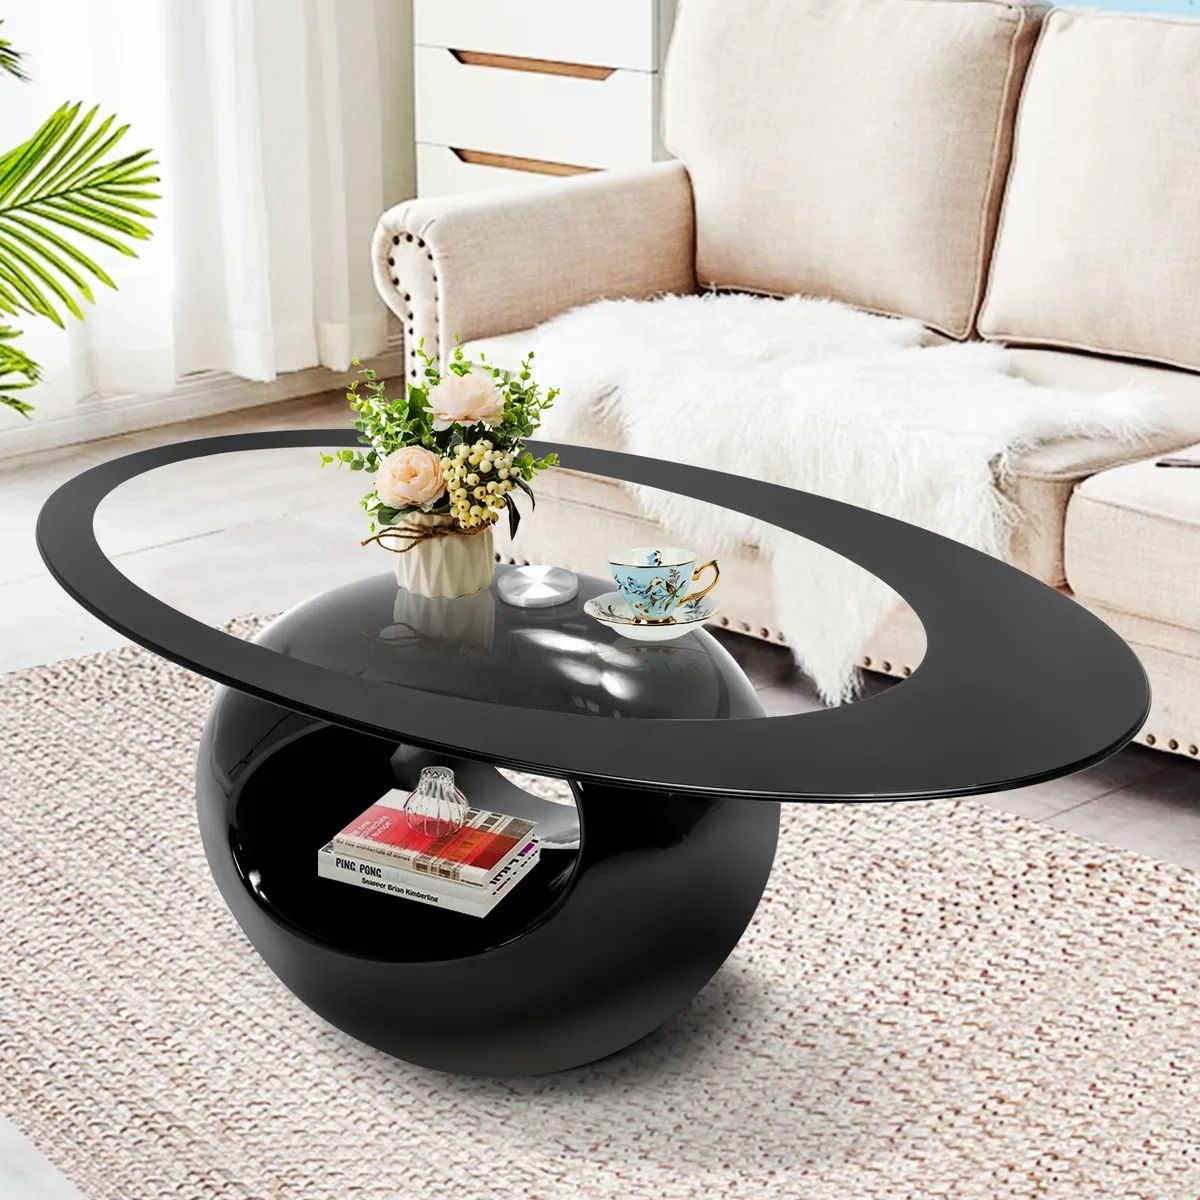 High Gloss Coffee Table Oval Glass Top & Hollow End Side Living Room  Black/White | Ebay With Regard To Glass Top Coffee Tables (View 13 of 15)